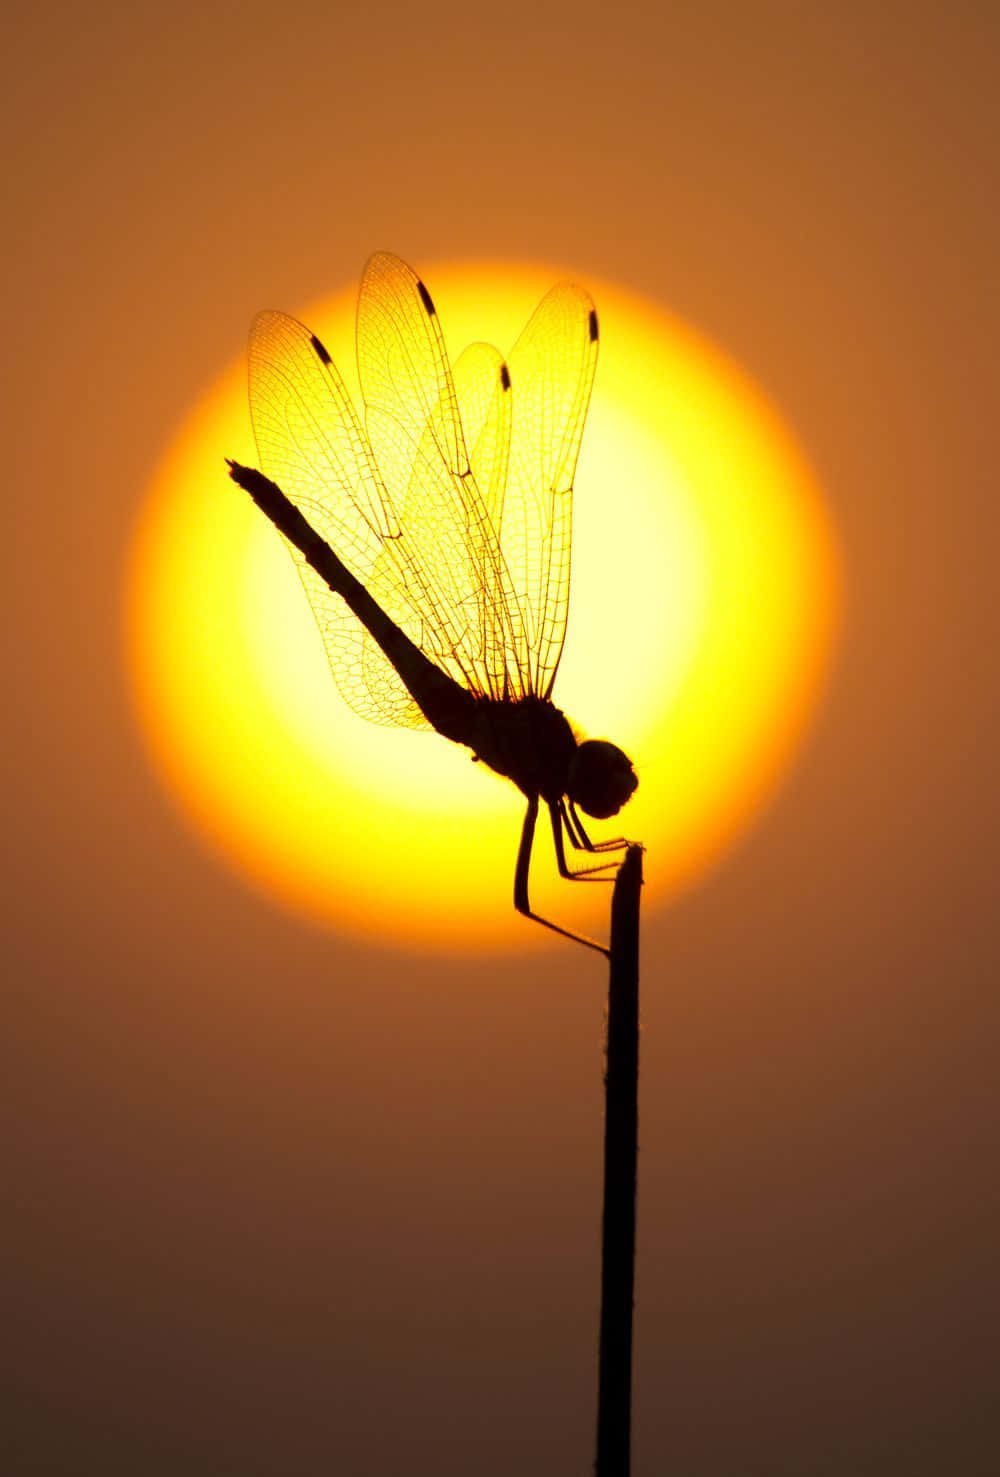 A beautiful dream-like blue dragonfly in the sky Wallpaper